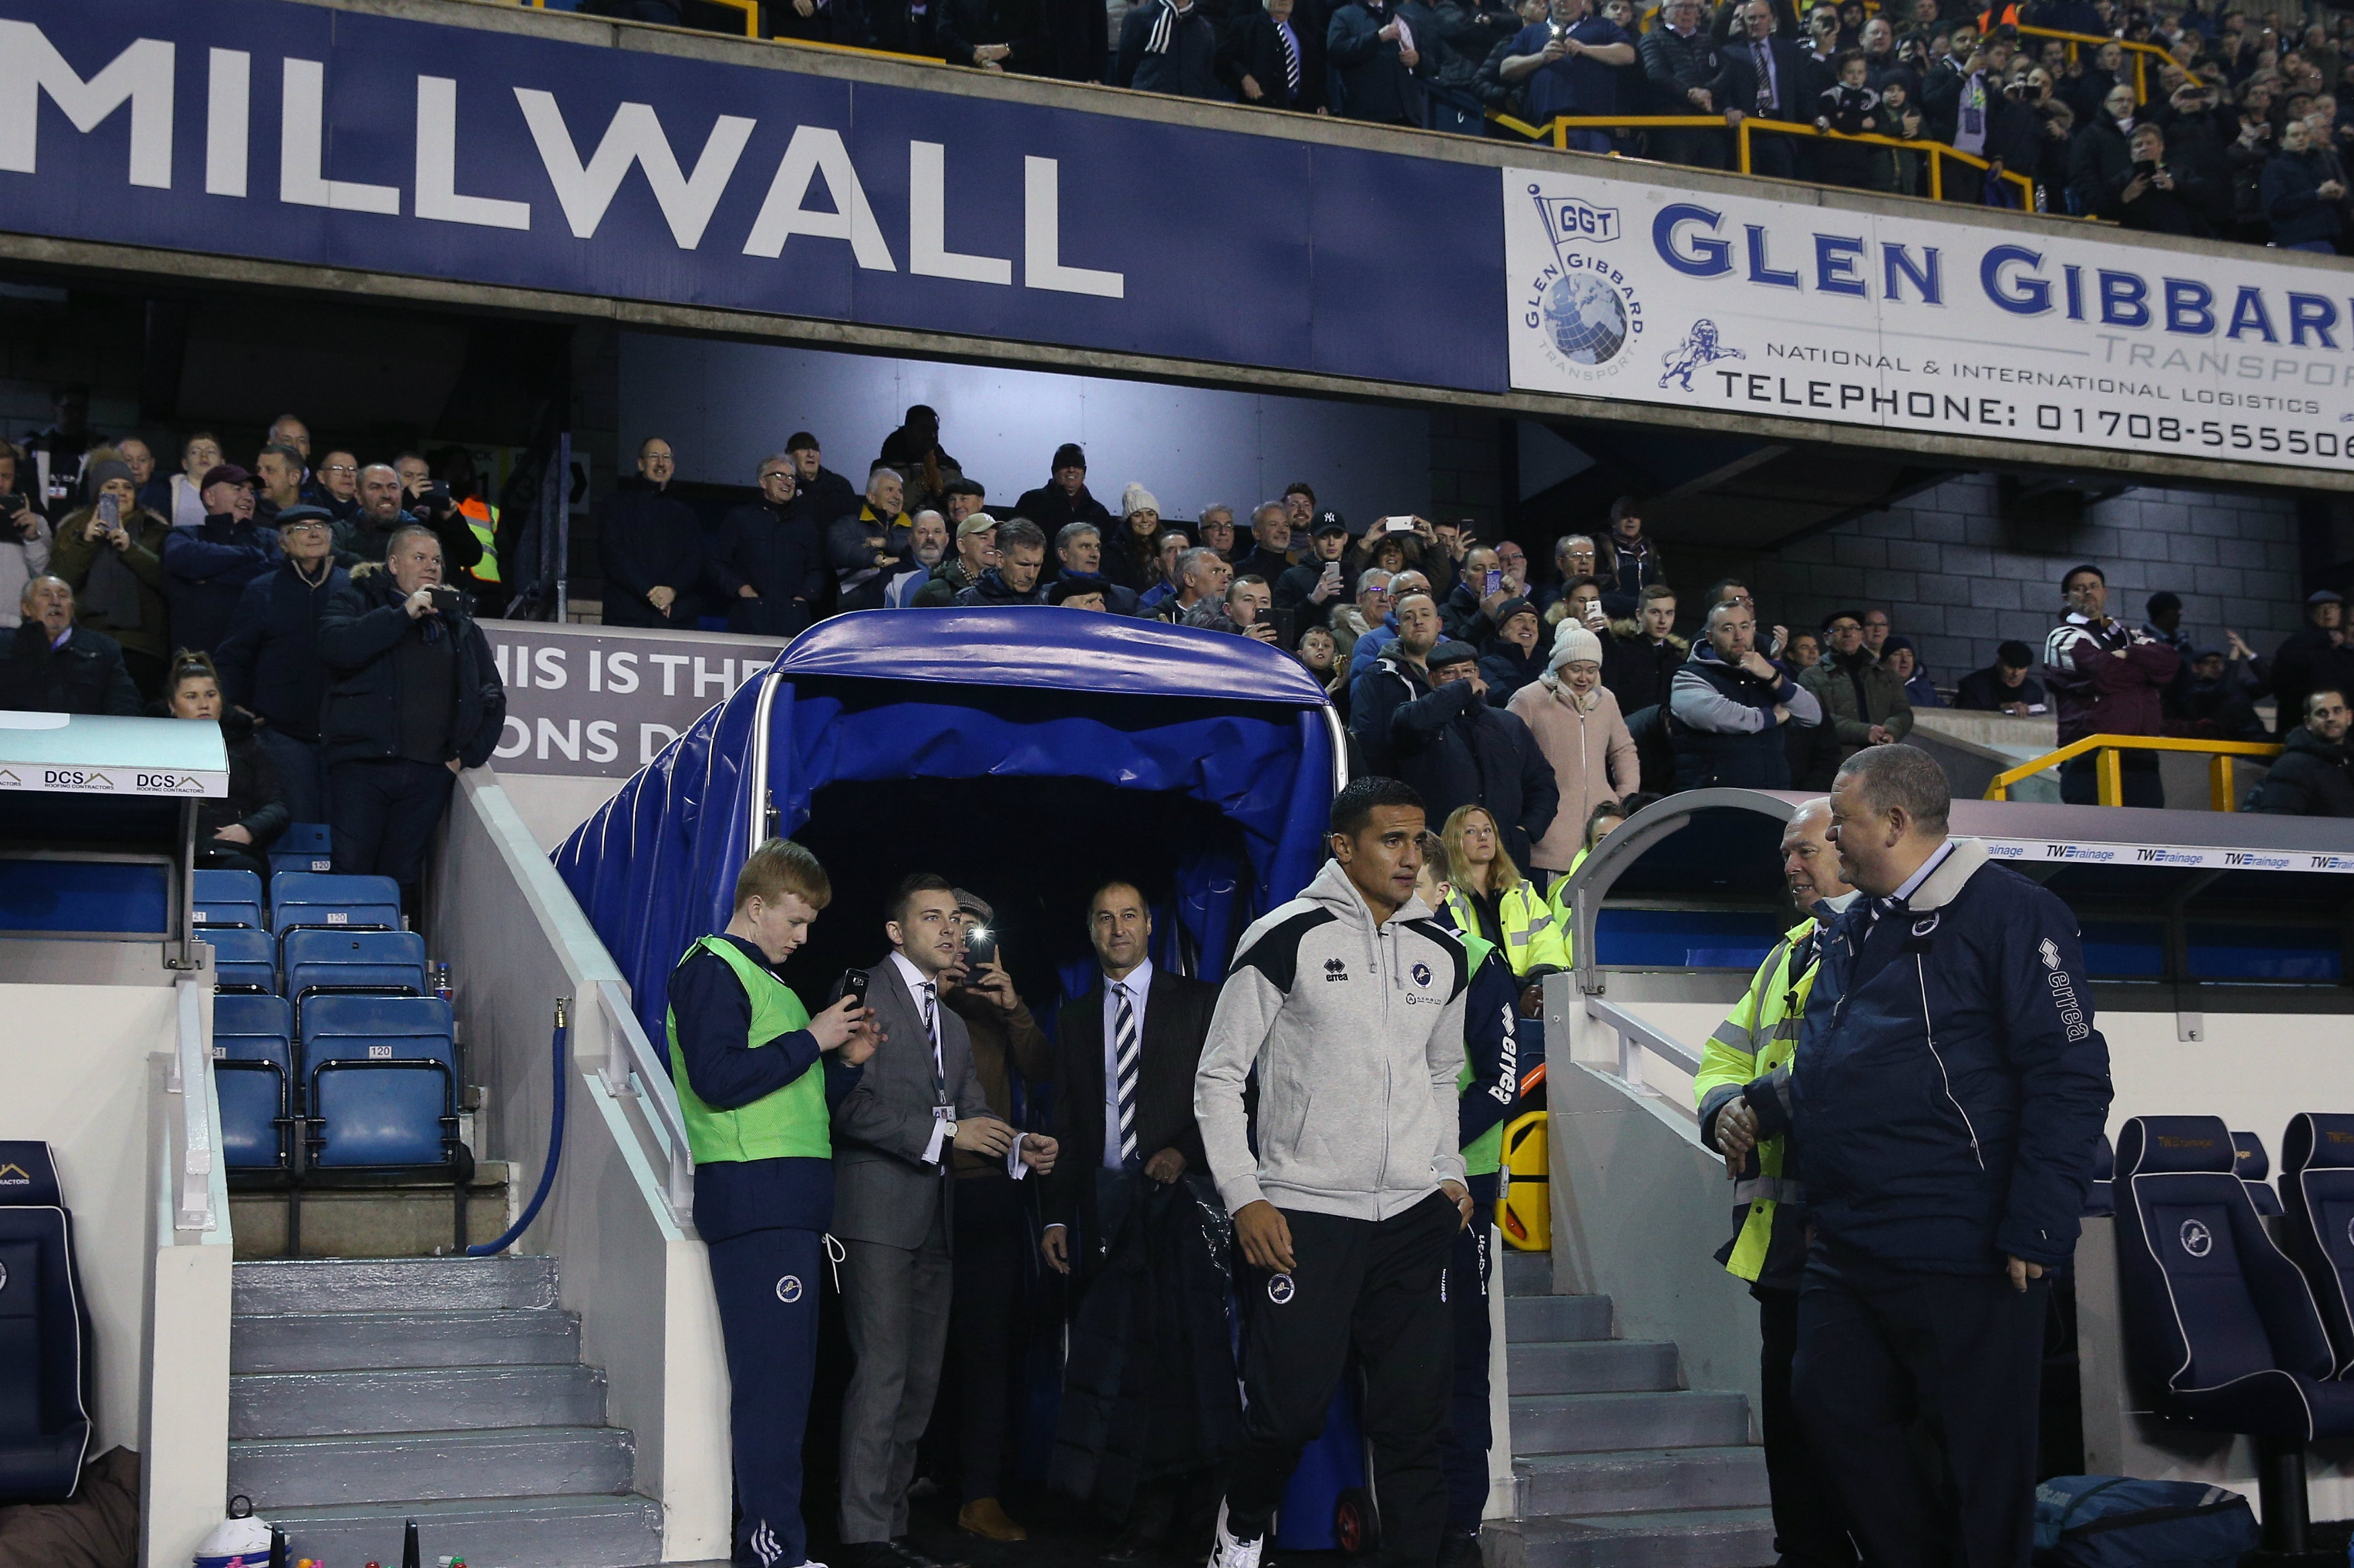 Tim Cahill was presented to the fans at Millwall's home clash in midweek.